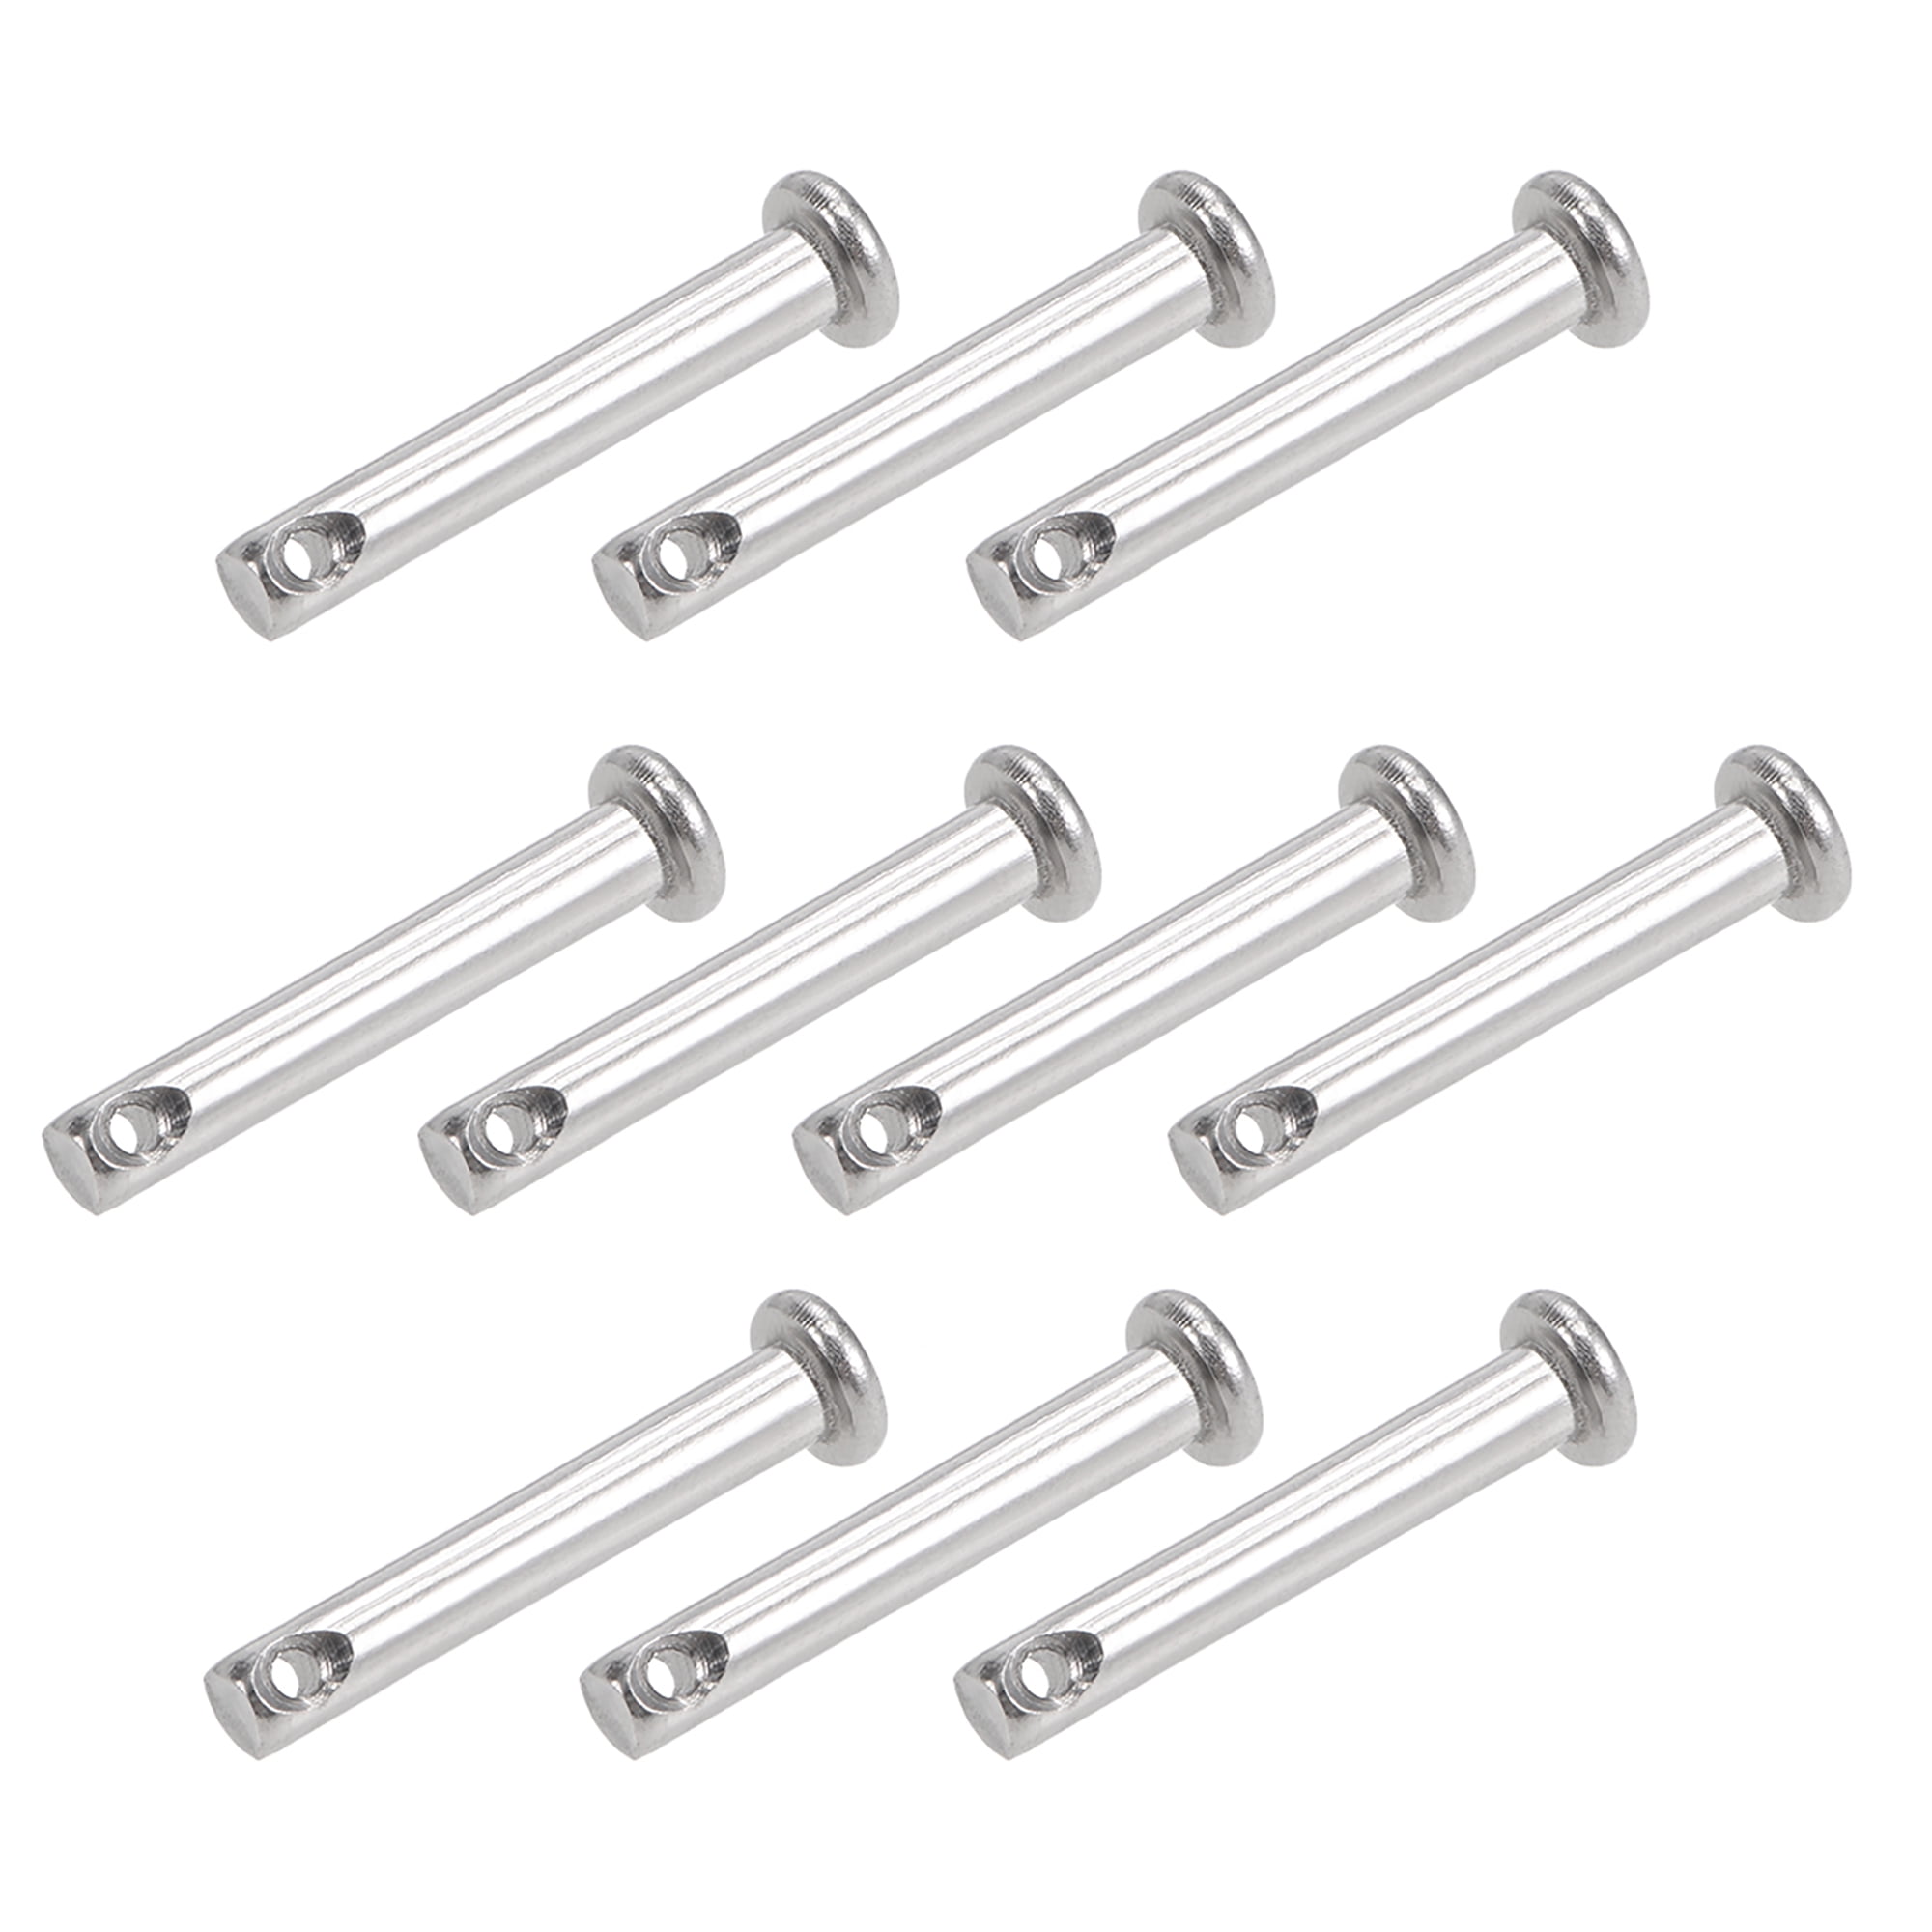 Single Hole Clevis Pins 4mm x 16mm Flat Head 304 Stainless Steel Pin 20Pcs